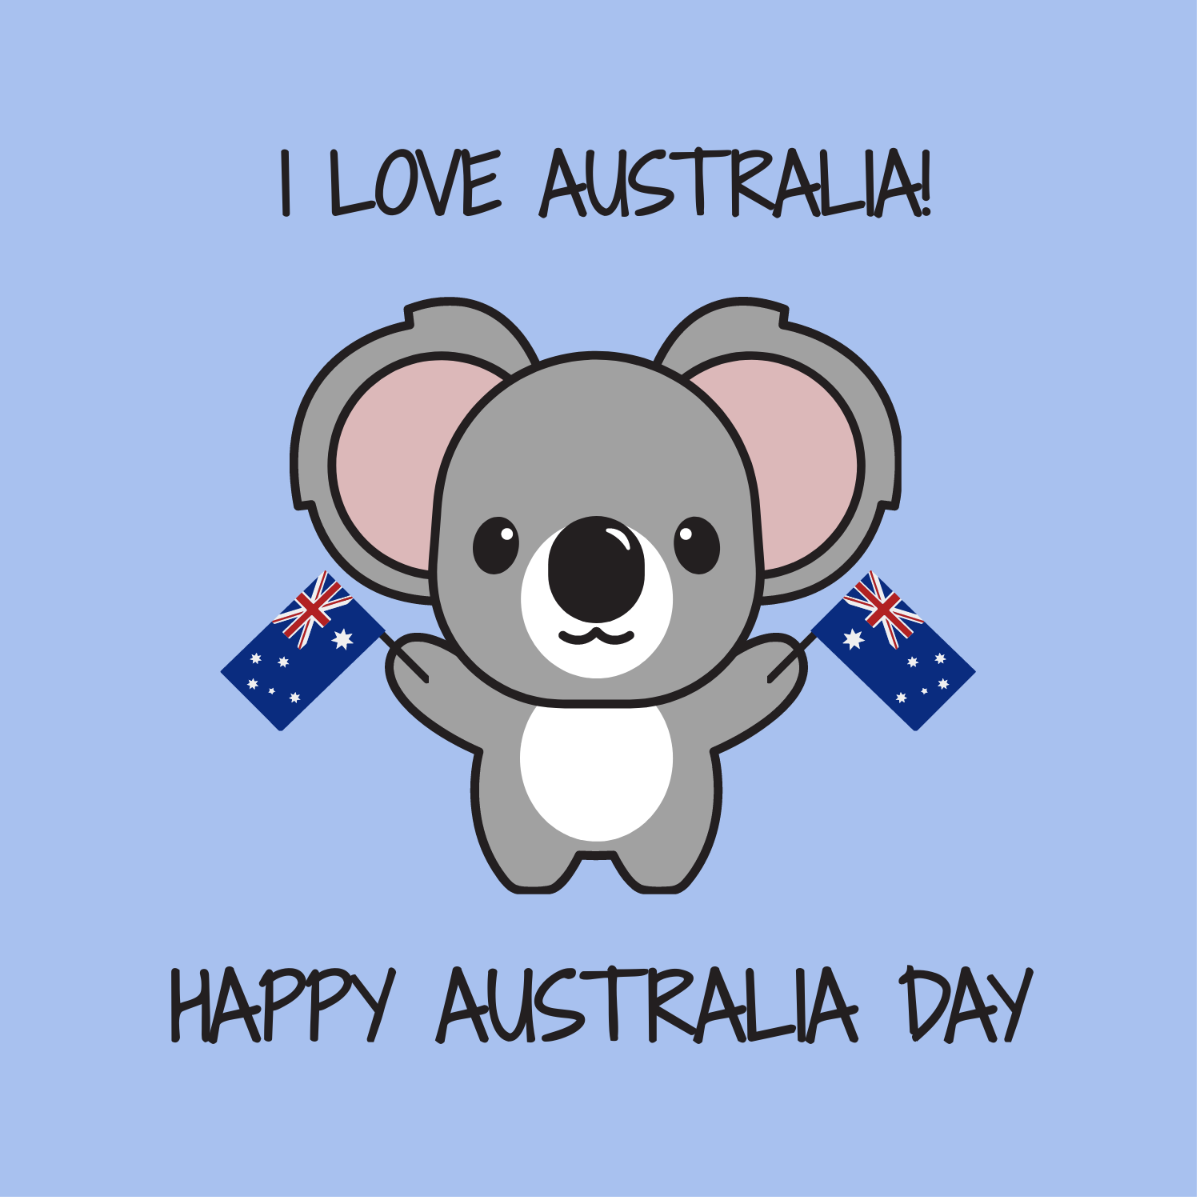 Free Australia Day Wishes Vector Template